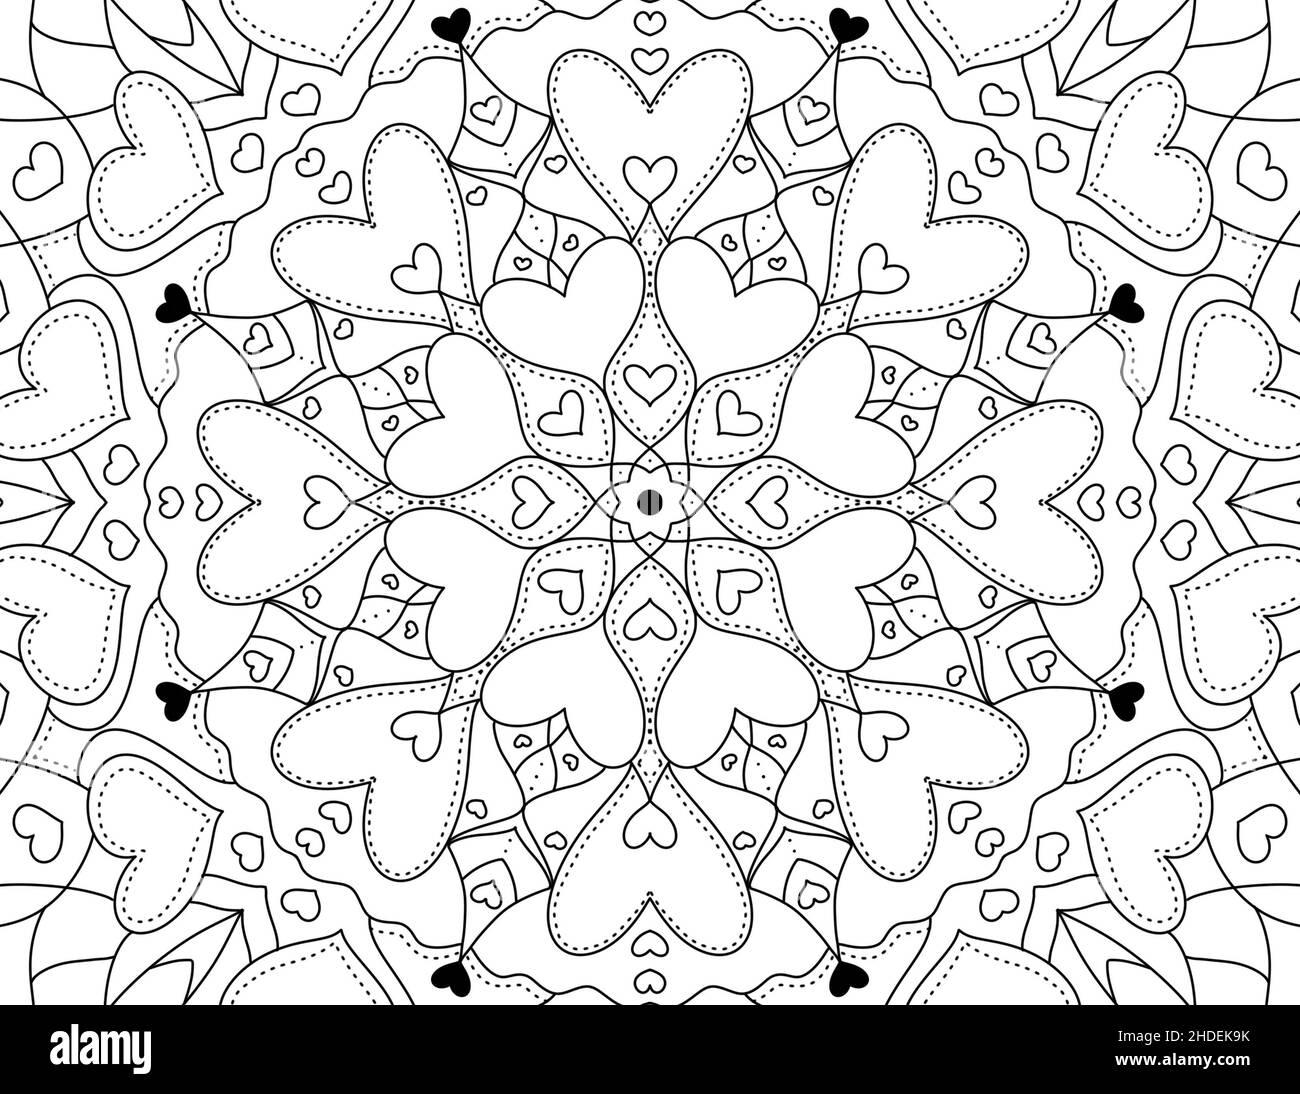 Geometric Coloring Book: The Mindfulness Coloring Book and Patterns Coloring Pages for Relaxation and Stress Relief for Adults Contains Simple Beautiful Designs to Color. [Book]